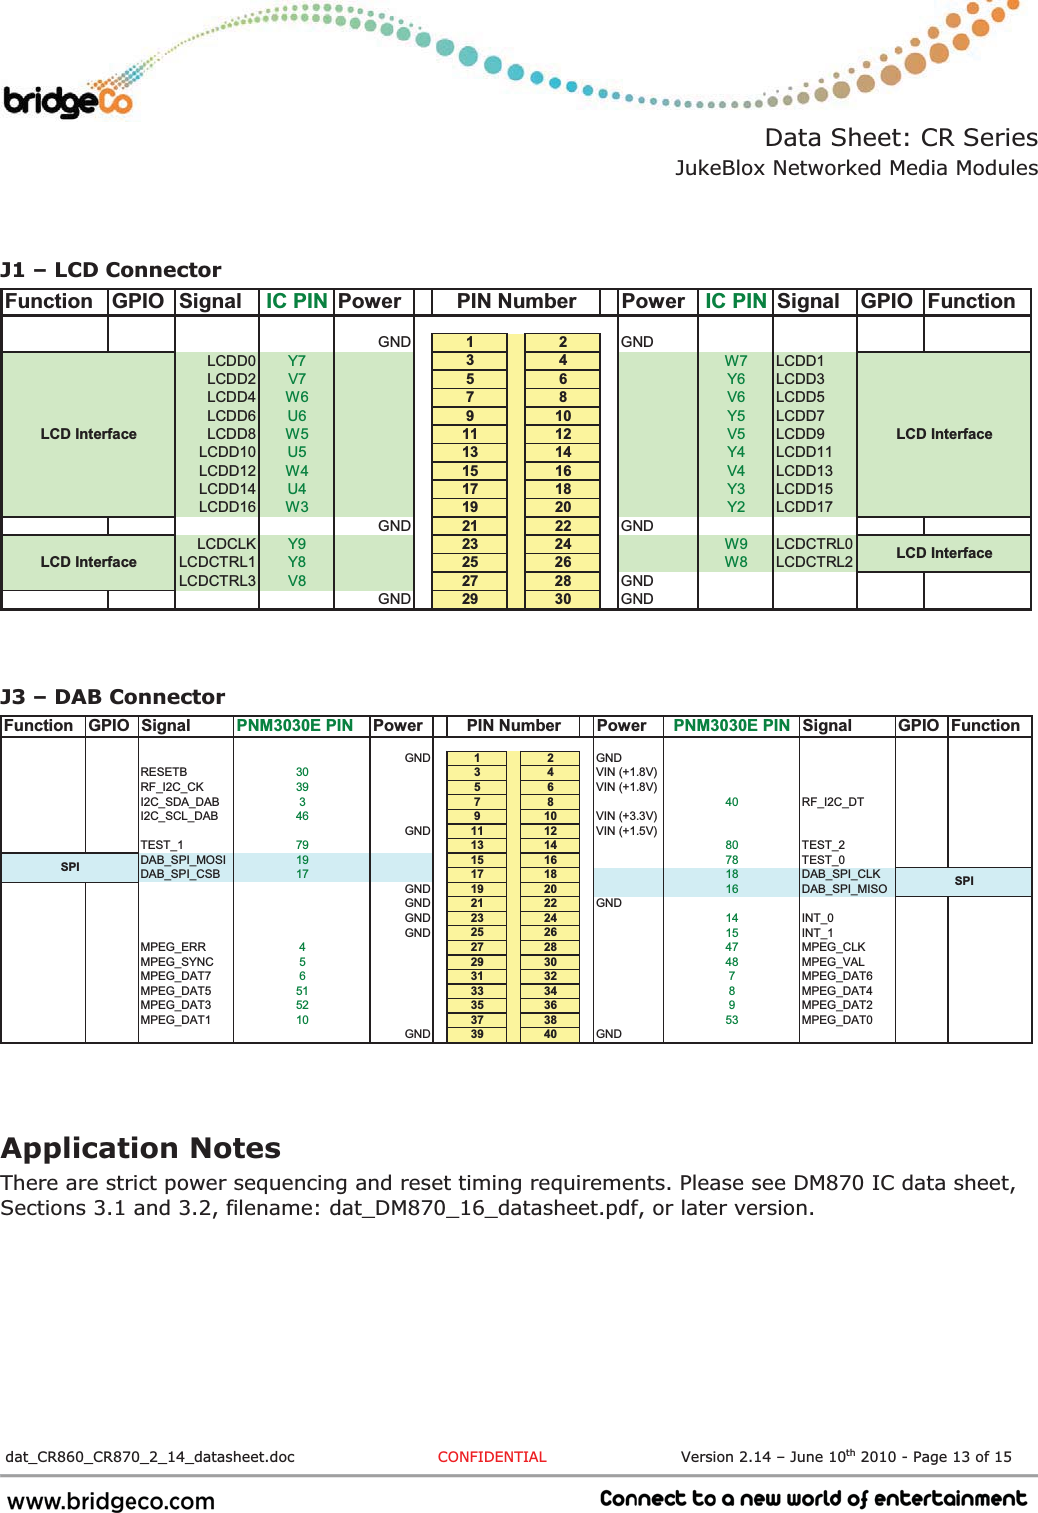 Data Sheet: CR Series JukeBlox Networked Media Modules  dat_CR860_CR870_2_14_datasheet.doc  CONFIDENTIAL                           Version 2.14 – June 10th 2010 - Page 13 of 15                             J1 – LCD Connector Function GPIO Signal IC PIN Power Power IC PIN Signal GPIO FunctionGND 12GNDLCDD0 Y7 34 W7 LCDD1LCDD2 V7 56 Y6 LCDD3LCDD4 W6 78 V6 LCDD5LCDD6 U6 910 Y5 LCDD7LCDD8 W5 11 12 V5 LCDD9LCDD10 U5 13 14 Y4 LCDD11LCDD12 W4 15 16 V4 LCDD13LCDD14 U4 17 18 Y3 LCDD15LCDD16 W3 19 20 Y2 LCDD17GND 21 22 GNDLCDCLK Y9 23 24 W9 LCDCTRL0LCDCTRL1 Y8 25 26 W8 LCDCTRL2LCDCTRL3 V8 27 28 GNDGND 29 30 GNDPIN NumberLCD InterfaceLCD InterfaceLCD InterfaceLCD InterfaceJ3 – DAB Connector Function GPIO Signal PNM3030E PIN Power Power PNM3030E PIN Signal GPIO FunctionGND 12GNDRESETB 30 34VIN (+1.8V)RF_I2C_CK 39 56VIN (+1.8V)I2C_SDA_DAB 378 40 RF_I2C_DTI2C_SCL_DAB 46 910VIN (+3.3V)GND 11 12 VIN (+1.5V)TEST_1 79 13 14 80 TEST_2DAB_SPI_MOSI 19 15 16 78 TEST_0DAB_SPI_CSB 17 17 18 18 DAB_SPI_CLKGND 19 20 16 DAB_SPI_MISOGND 21 22 GNDGND 23 24 14 INT_0GND 25 26 15 INT_1MPEG_ERR 427 28 47 MPEG_CLKMPEG_SYNC 529 30 48 MPEG_VALMPEG_DAT7 631 32 7MPEG_DAT6MPEG_DAT5 51 33 34 8MPEG_DAT4MPEG_DAT3 52 35 36 9MPEG_DAT2MPEG_DAT1 10 37 38 53 MPEG_DAT0GND 39 40 GNDPIN NumberSPISPIApplication Notes There are strict power sequencing and reset timing requirements. Please see DM870 IC data sheet, Sections 3.1 and 3.2, filename: dat_DM870_16_datasheet.pdf, or later version.